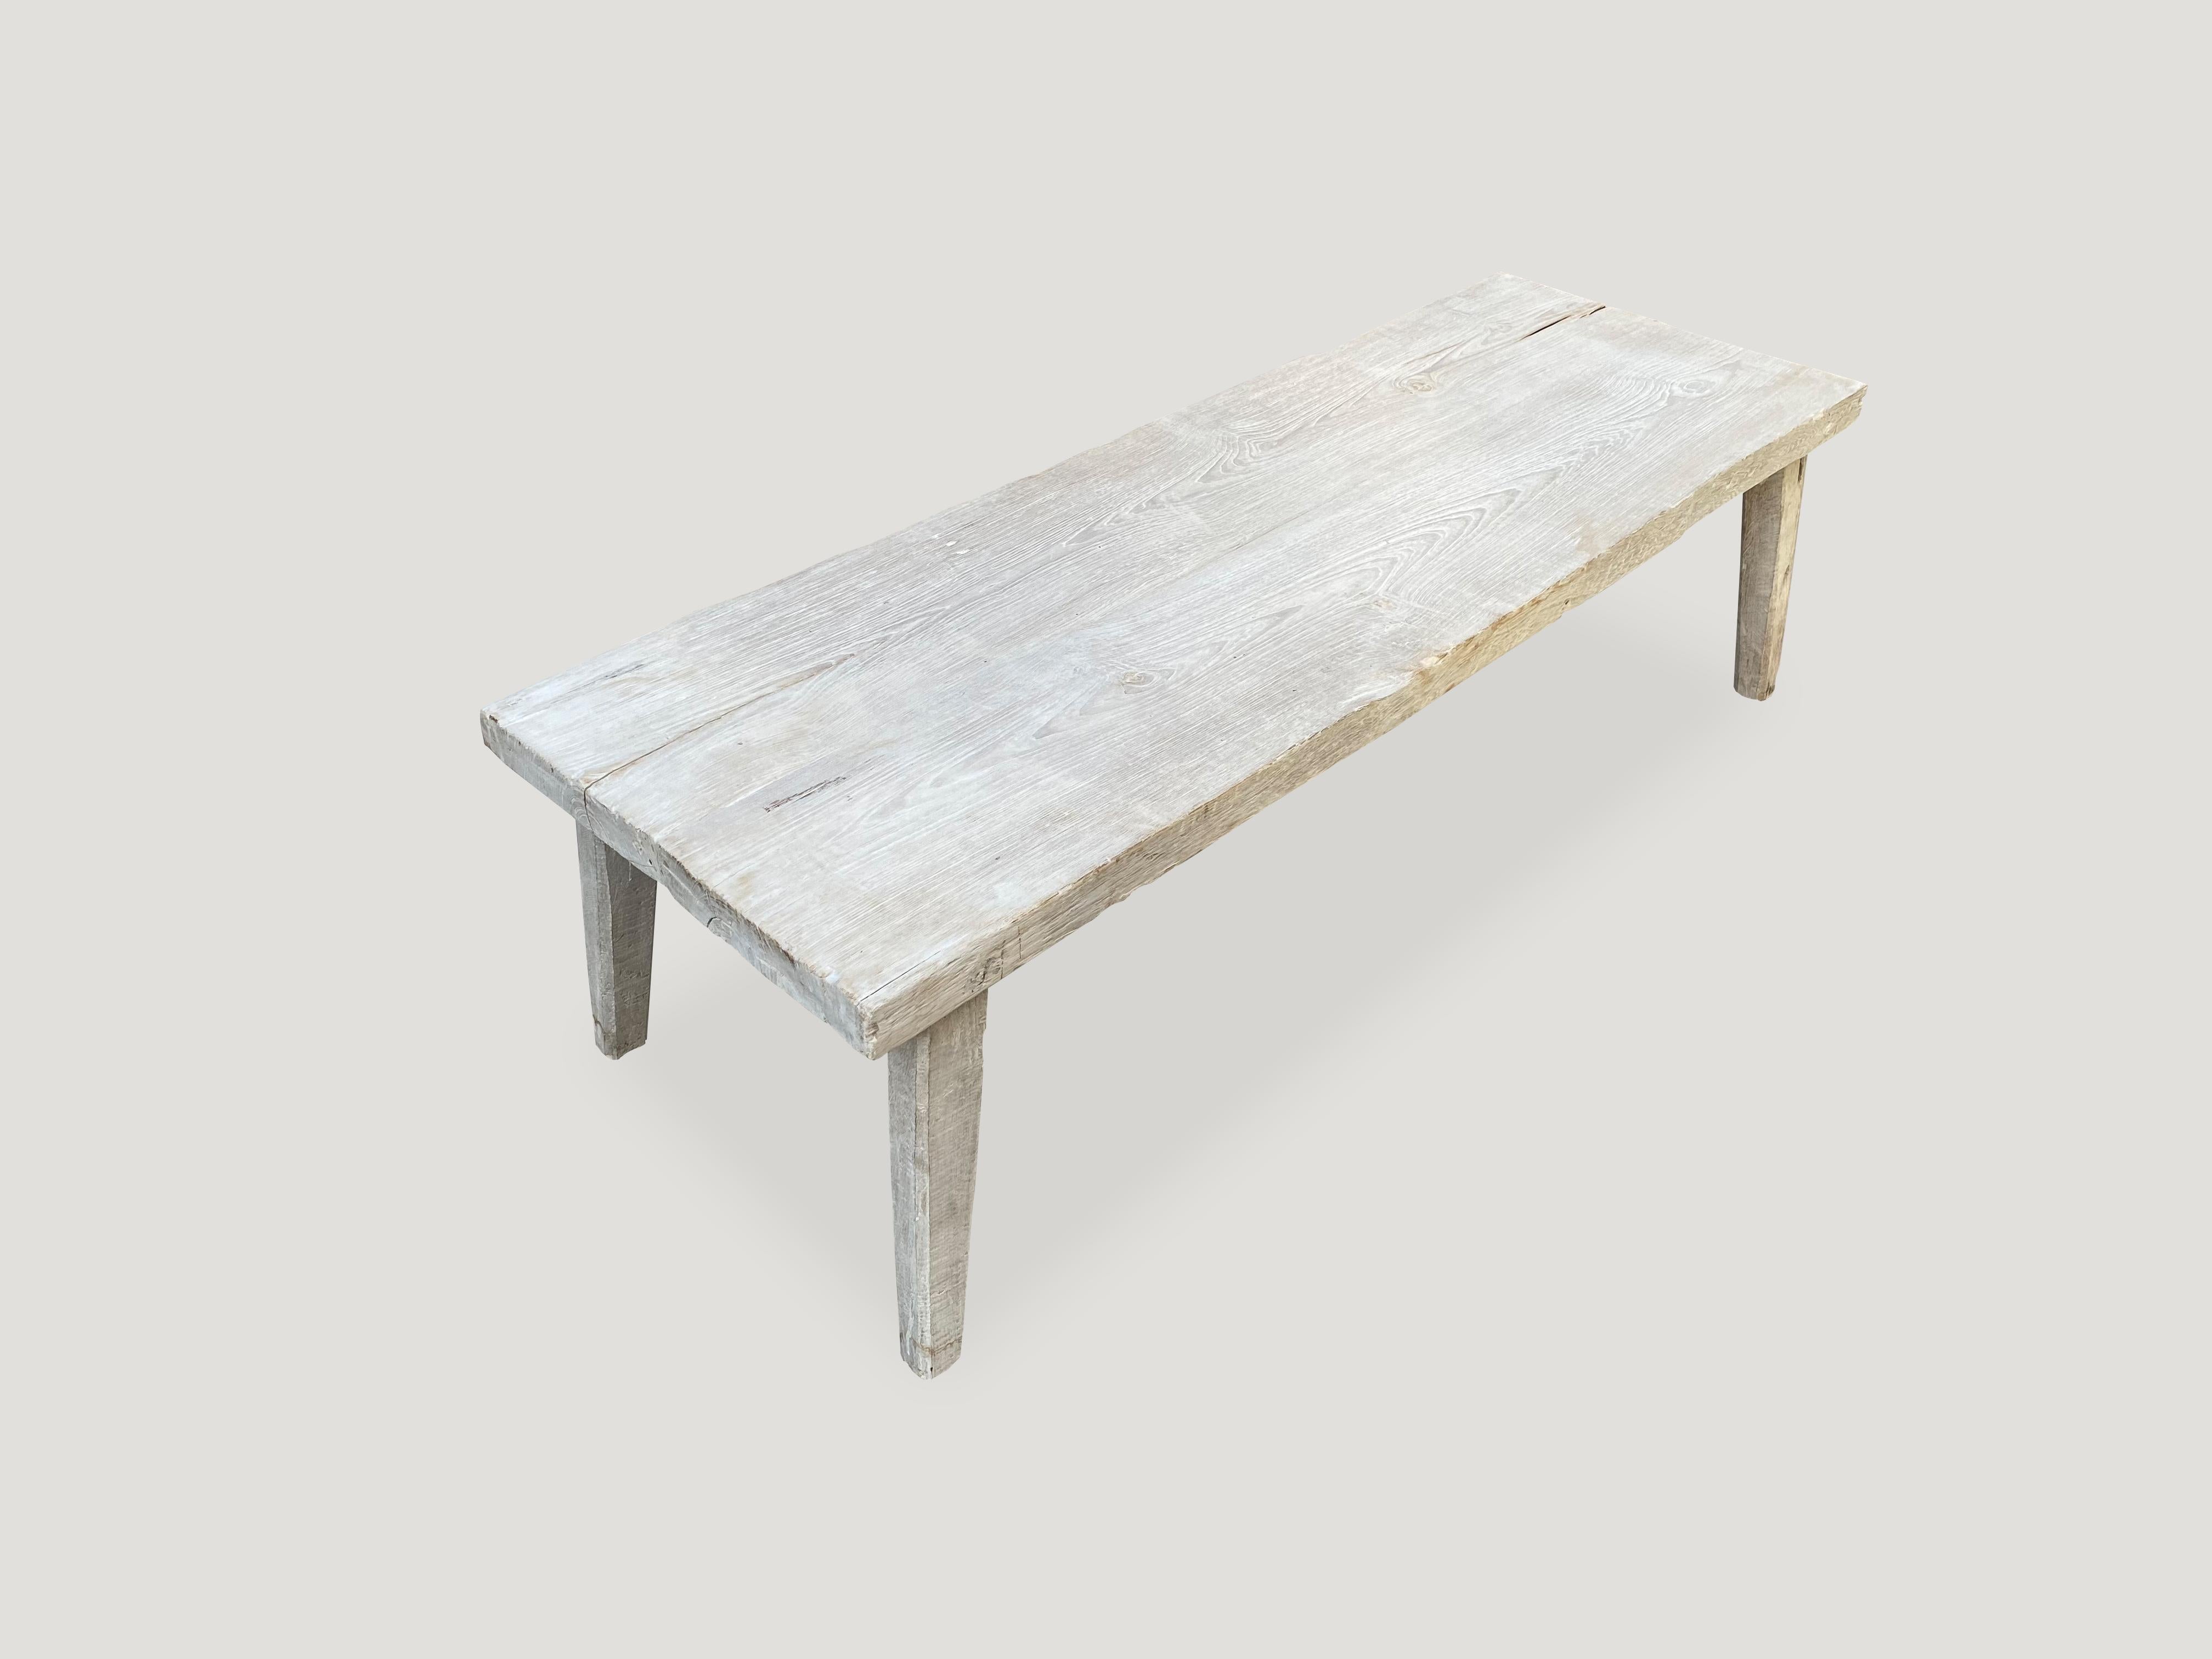 Andrianna Shamaris Bleached Teak Wood Bench or Coffee Table In Excellent Condition For Sale In New York, NY